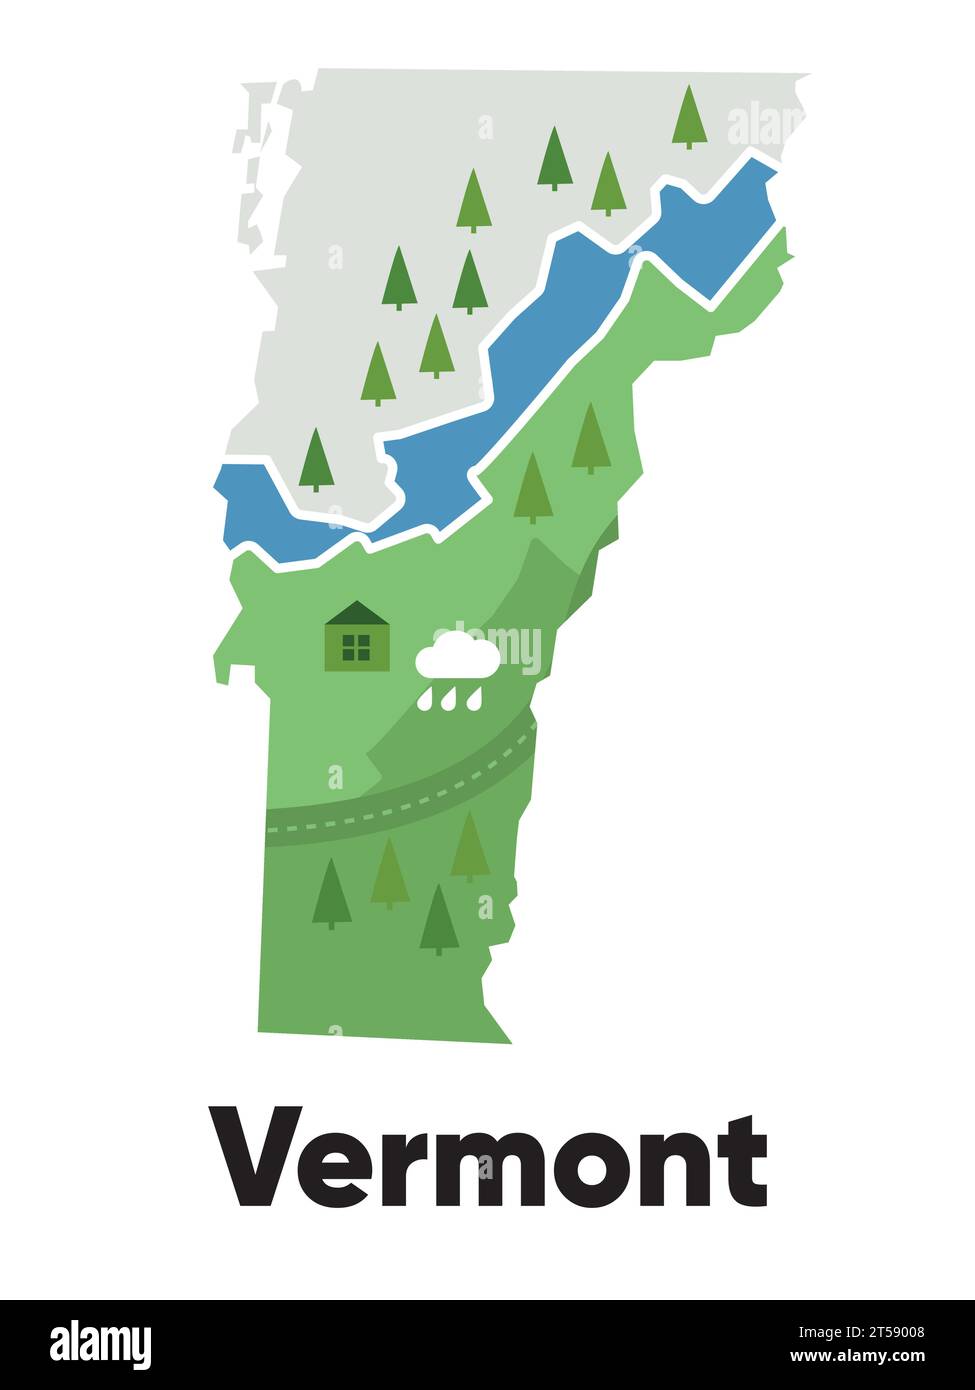 Vermont map shape of states cartoon style with forest tree and river landscape graphic illustration Stock Vector